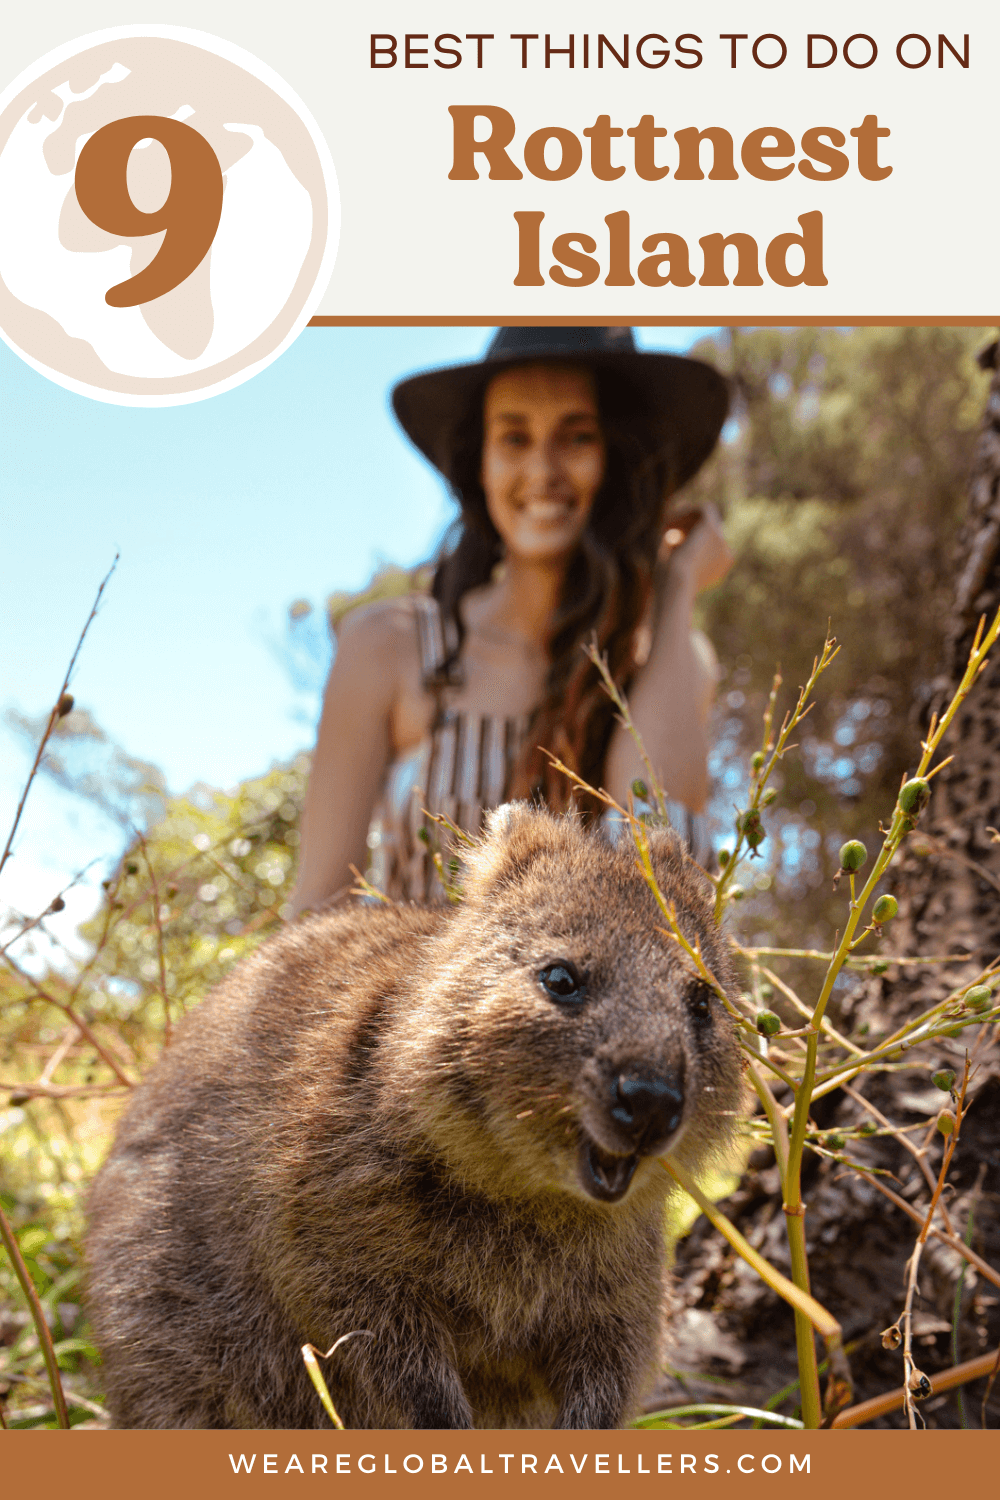 The best things to do on Rottnest Island, Western Australia